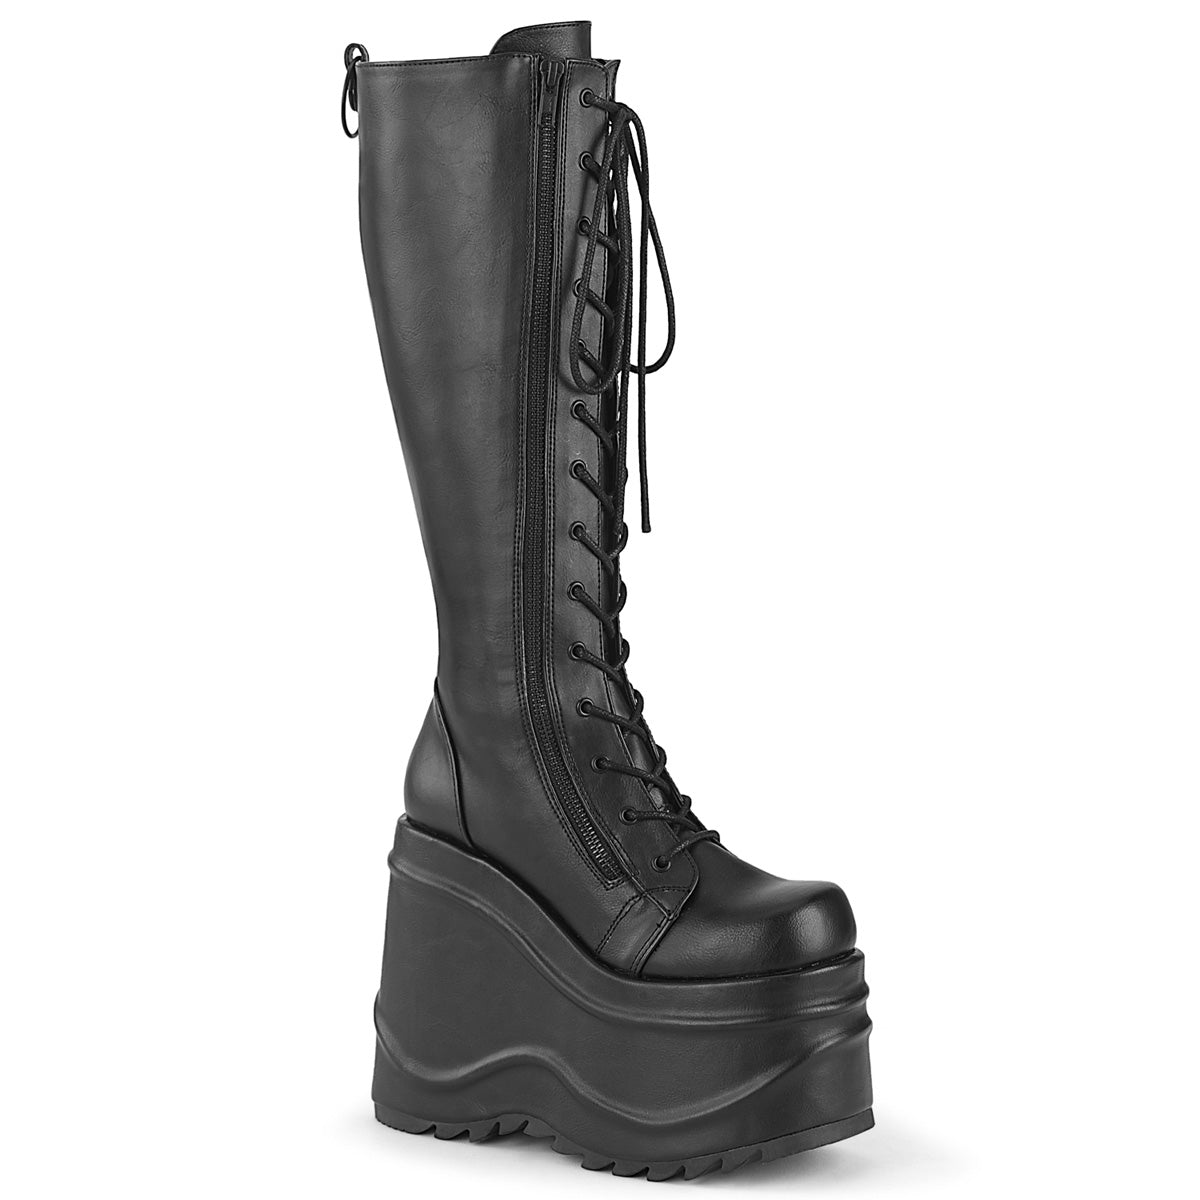 DemoniaCult Womens Boots WAVE-200 Blk Vegan Leather